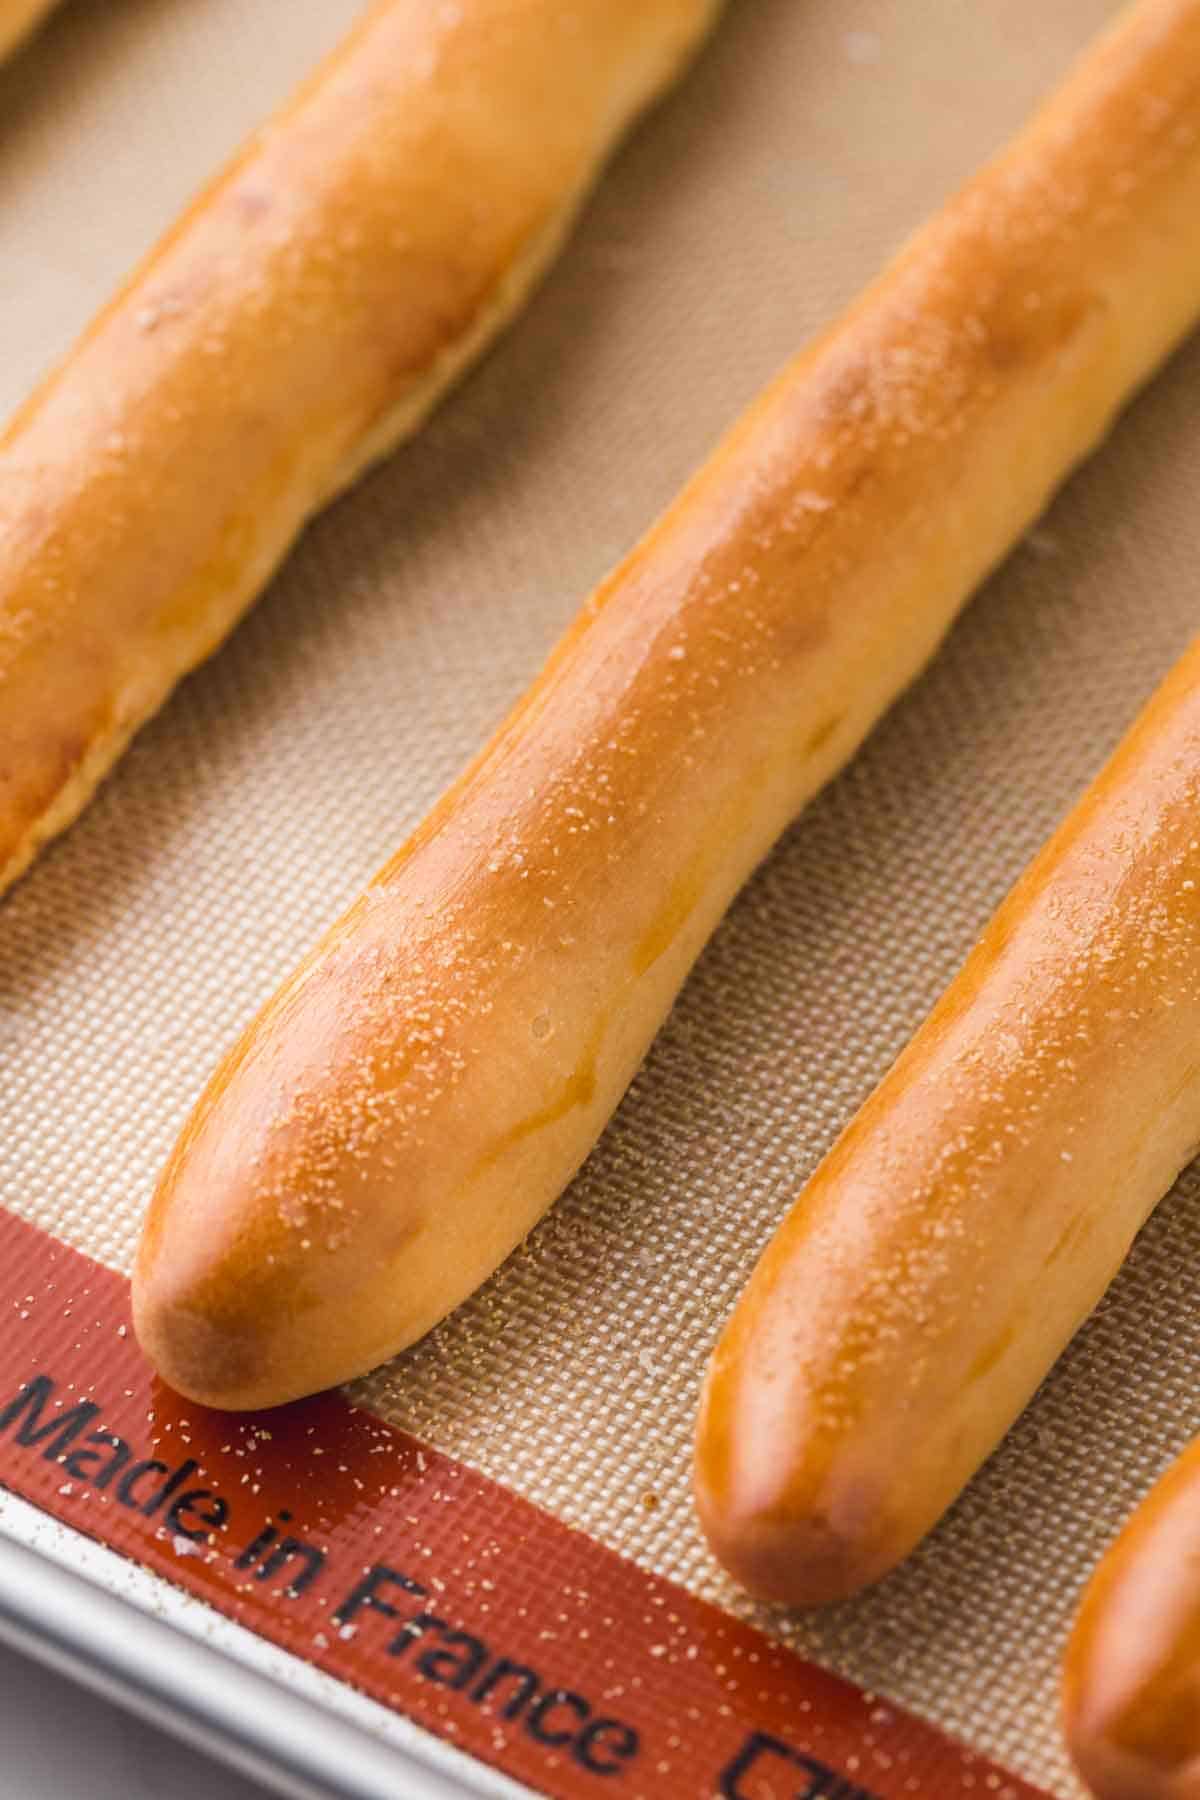 Shiny breadsticks with garlic powder sprinkled, on a silicone baking mat